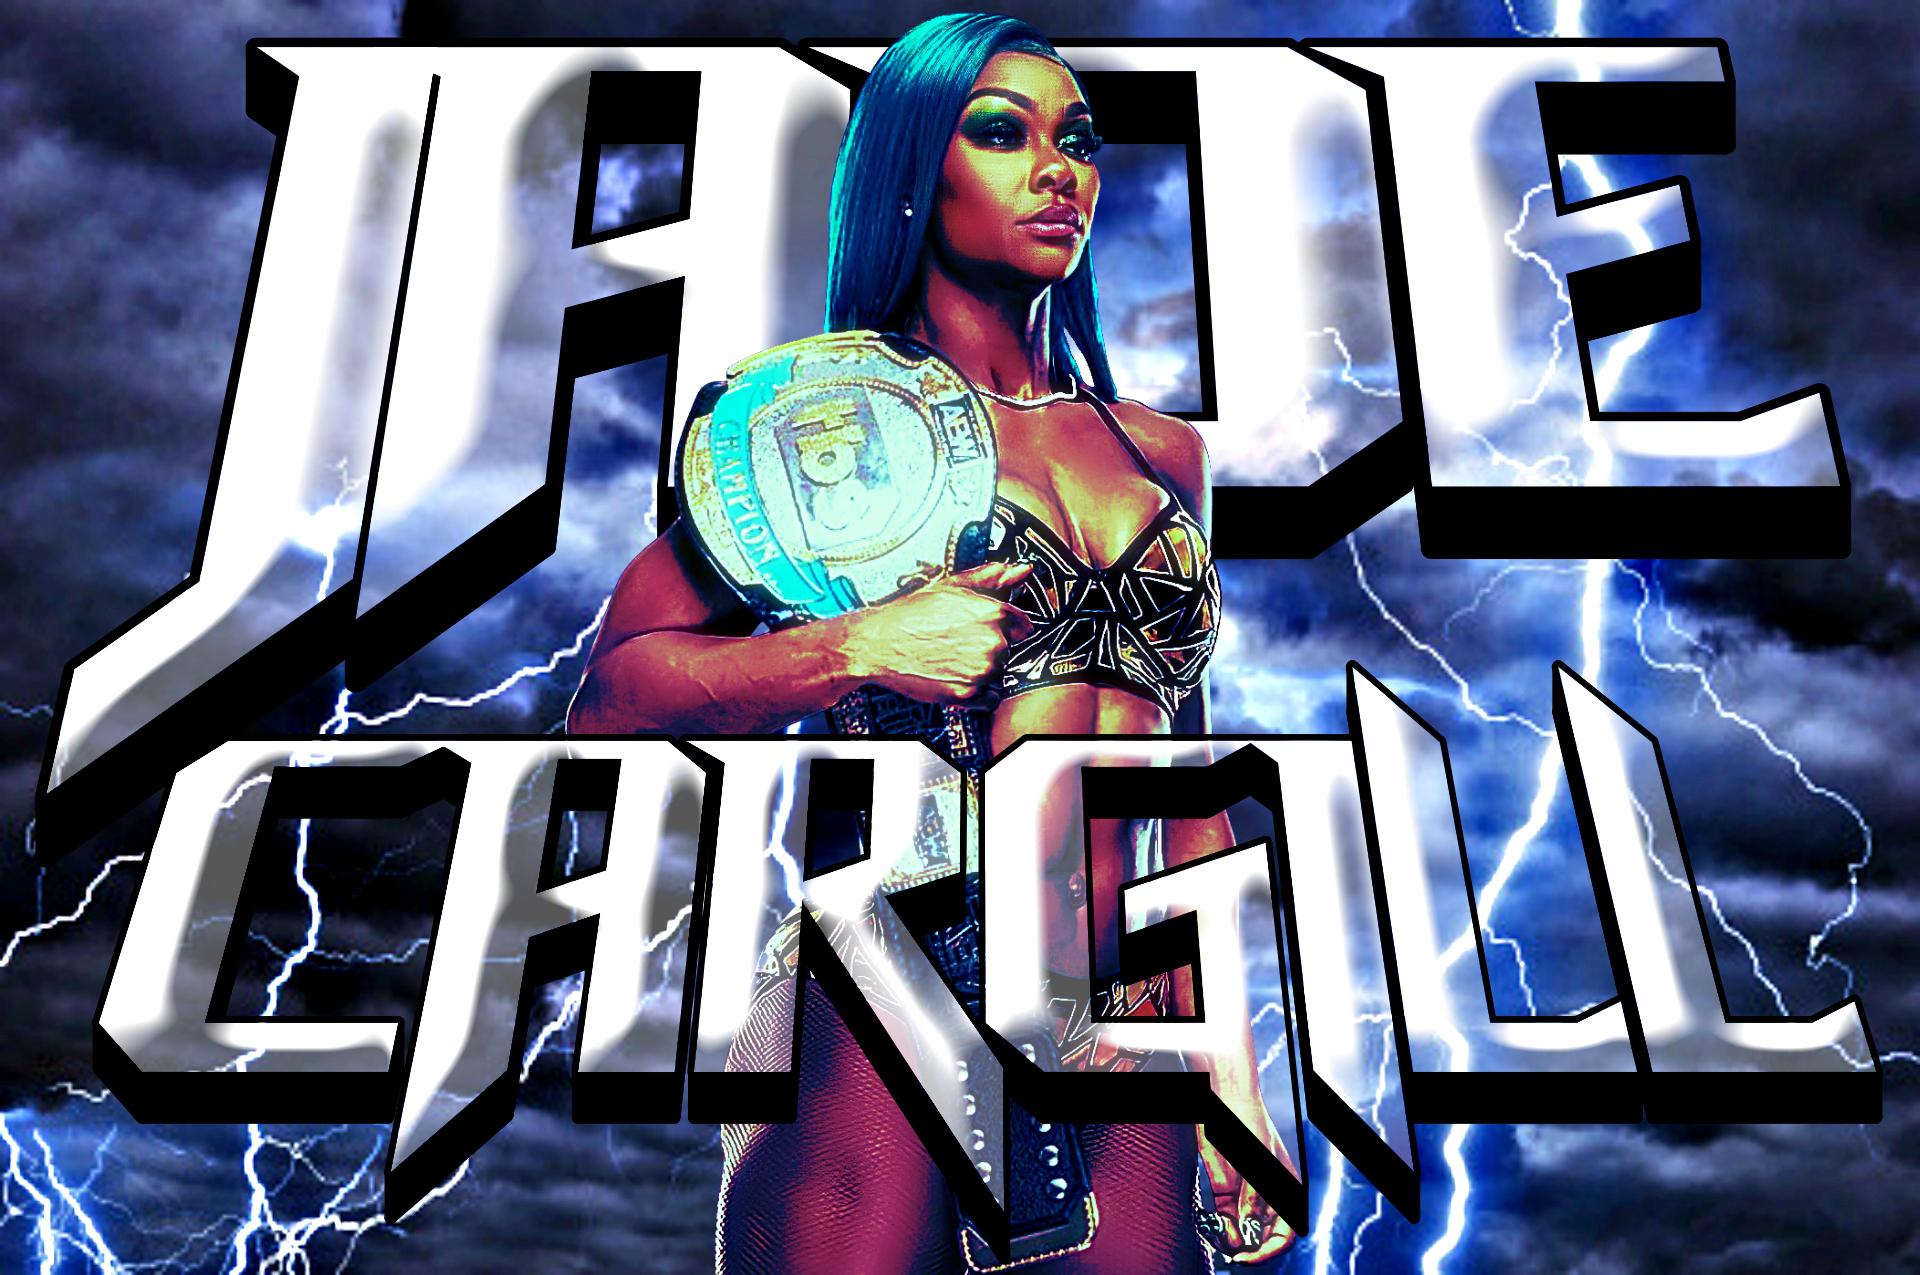 New wallpaper design featuring AEW's Jade Cargill, hope you all like it